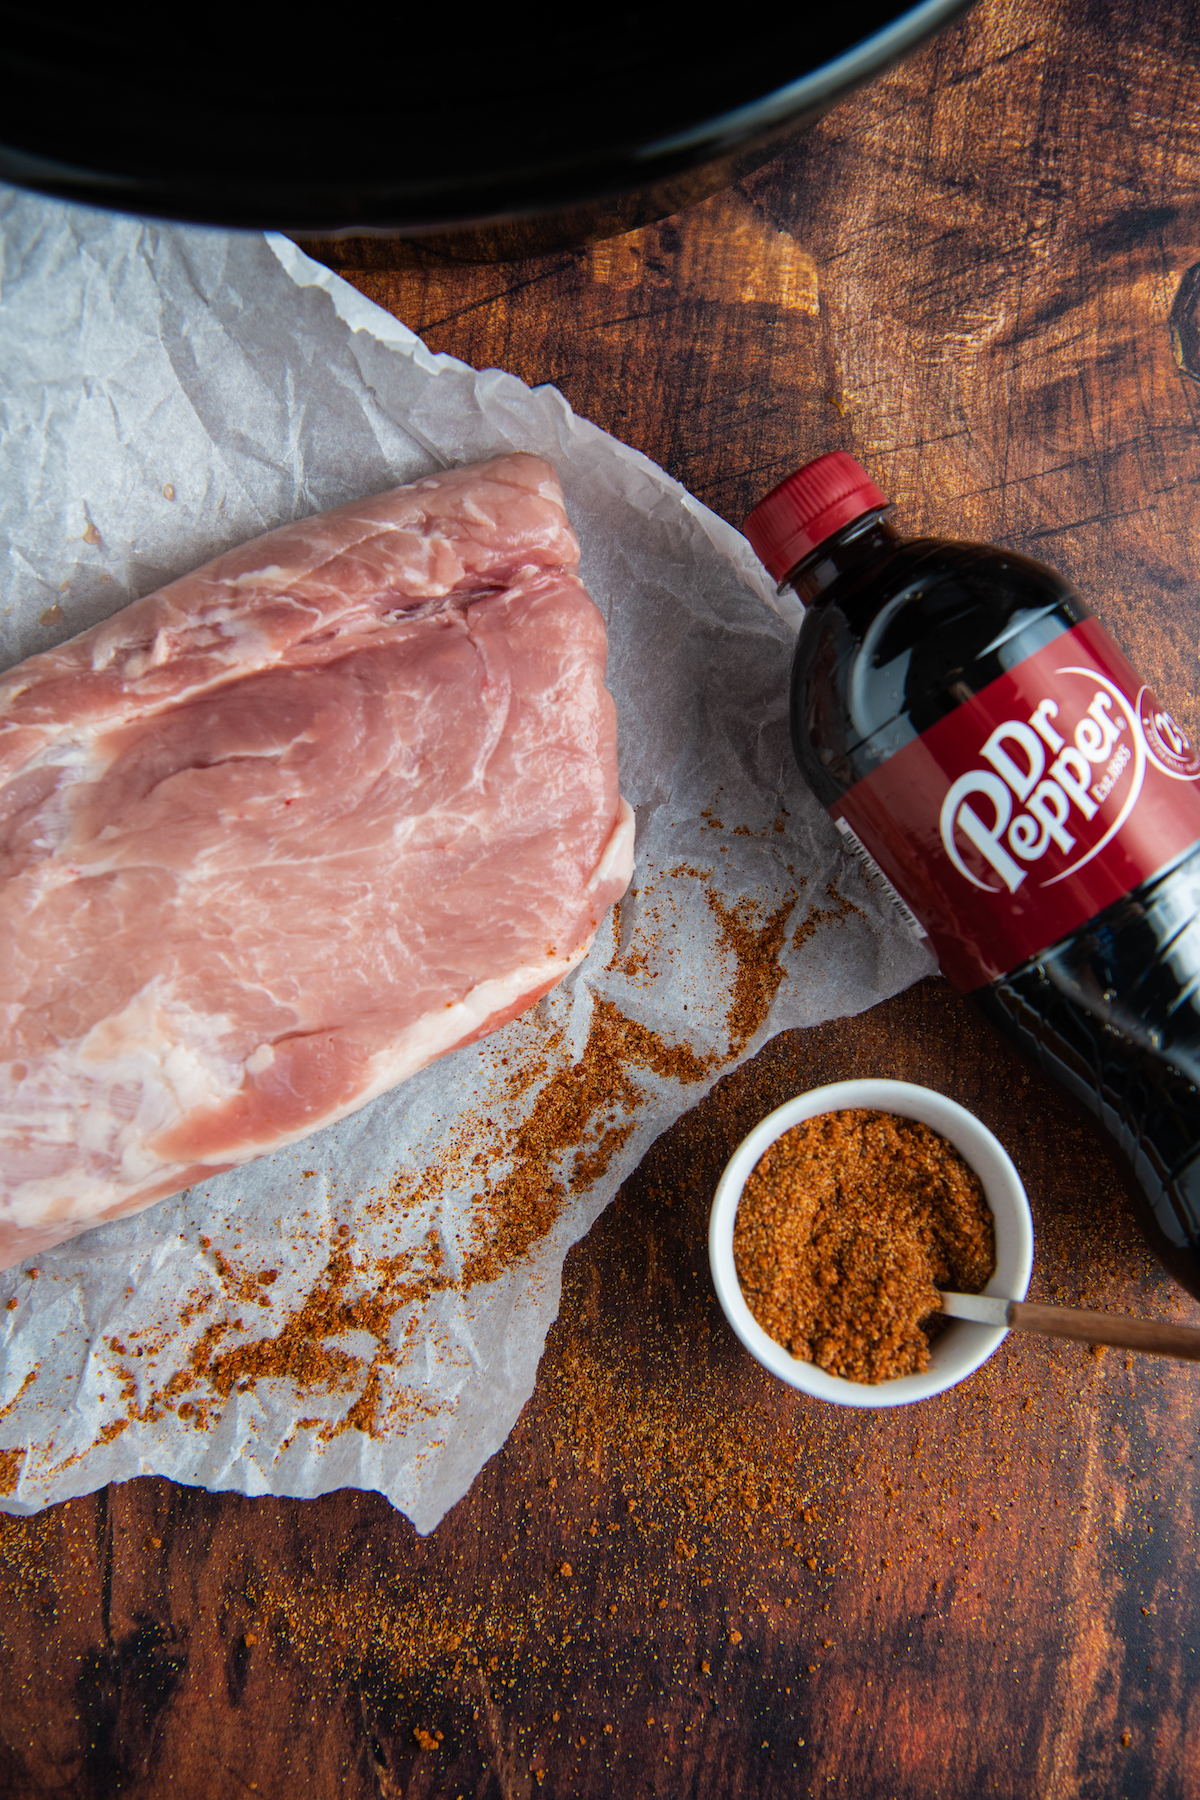 Overhead image of pork on parchment paper, a bottle of Dr Pepper and a jar with seasonings in it.